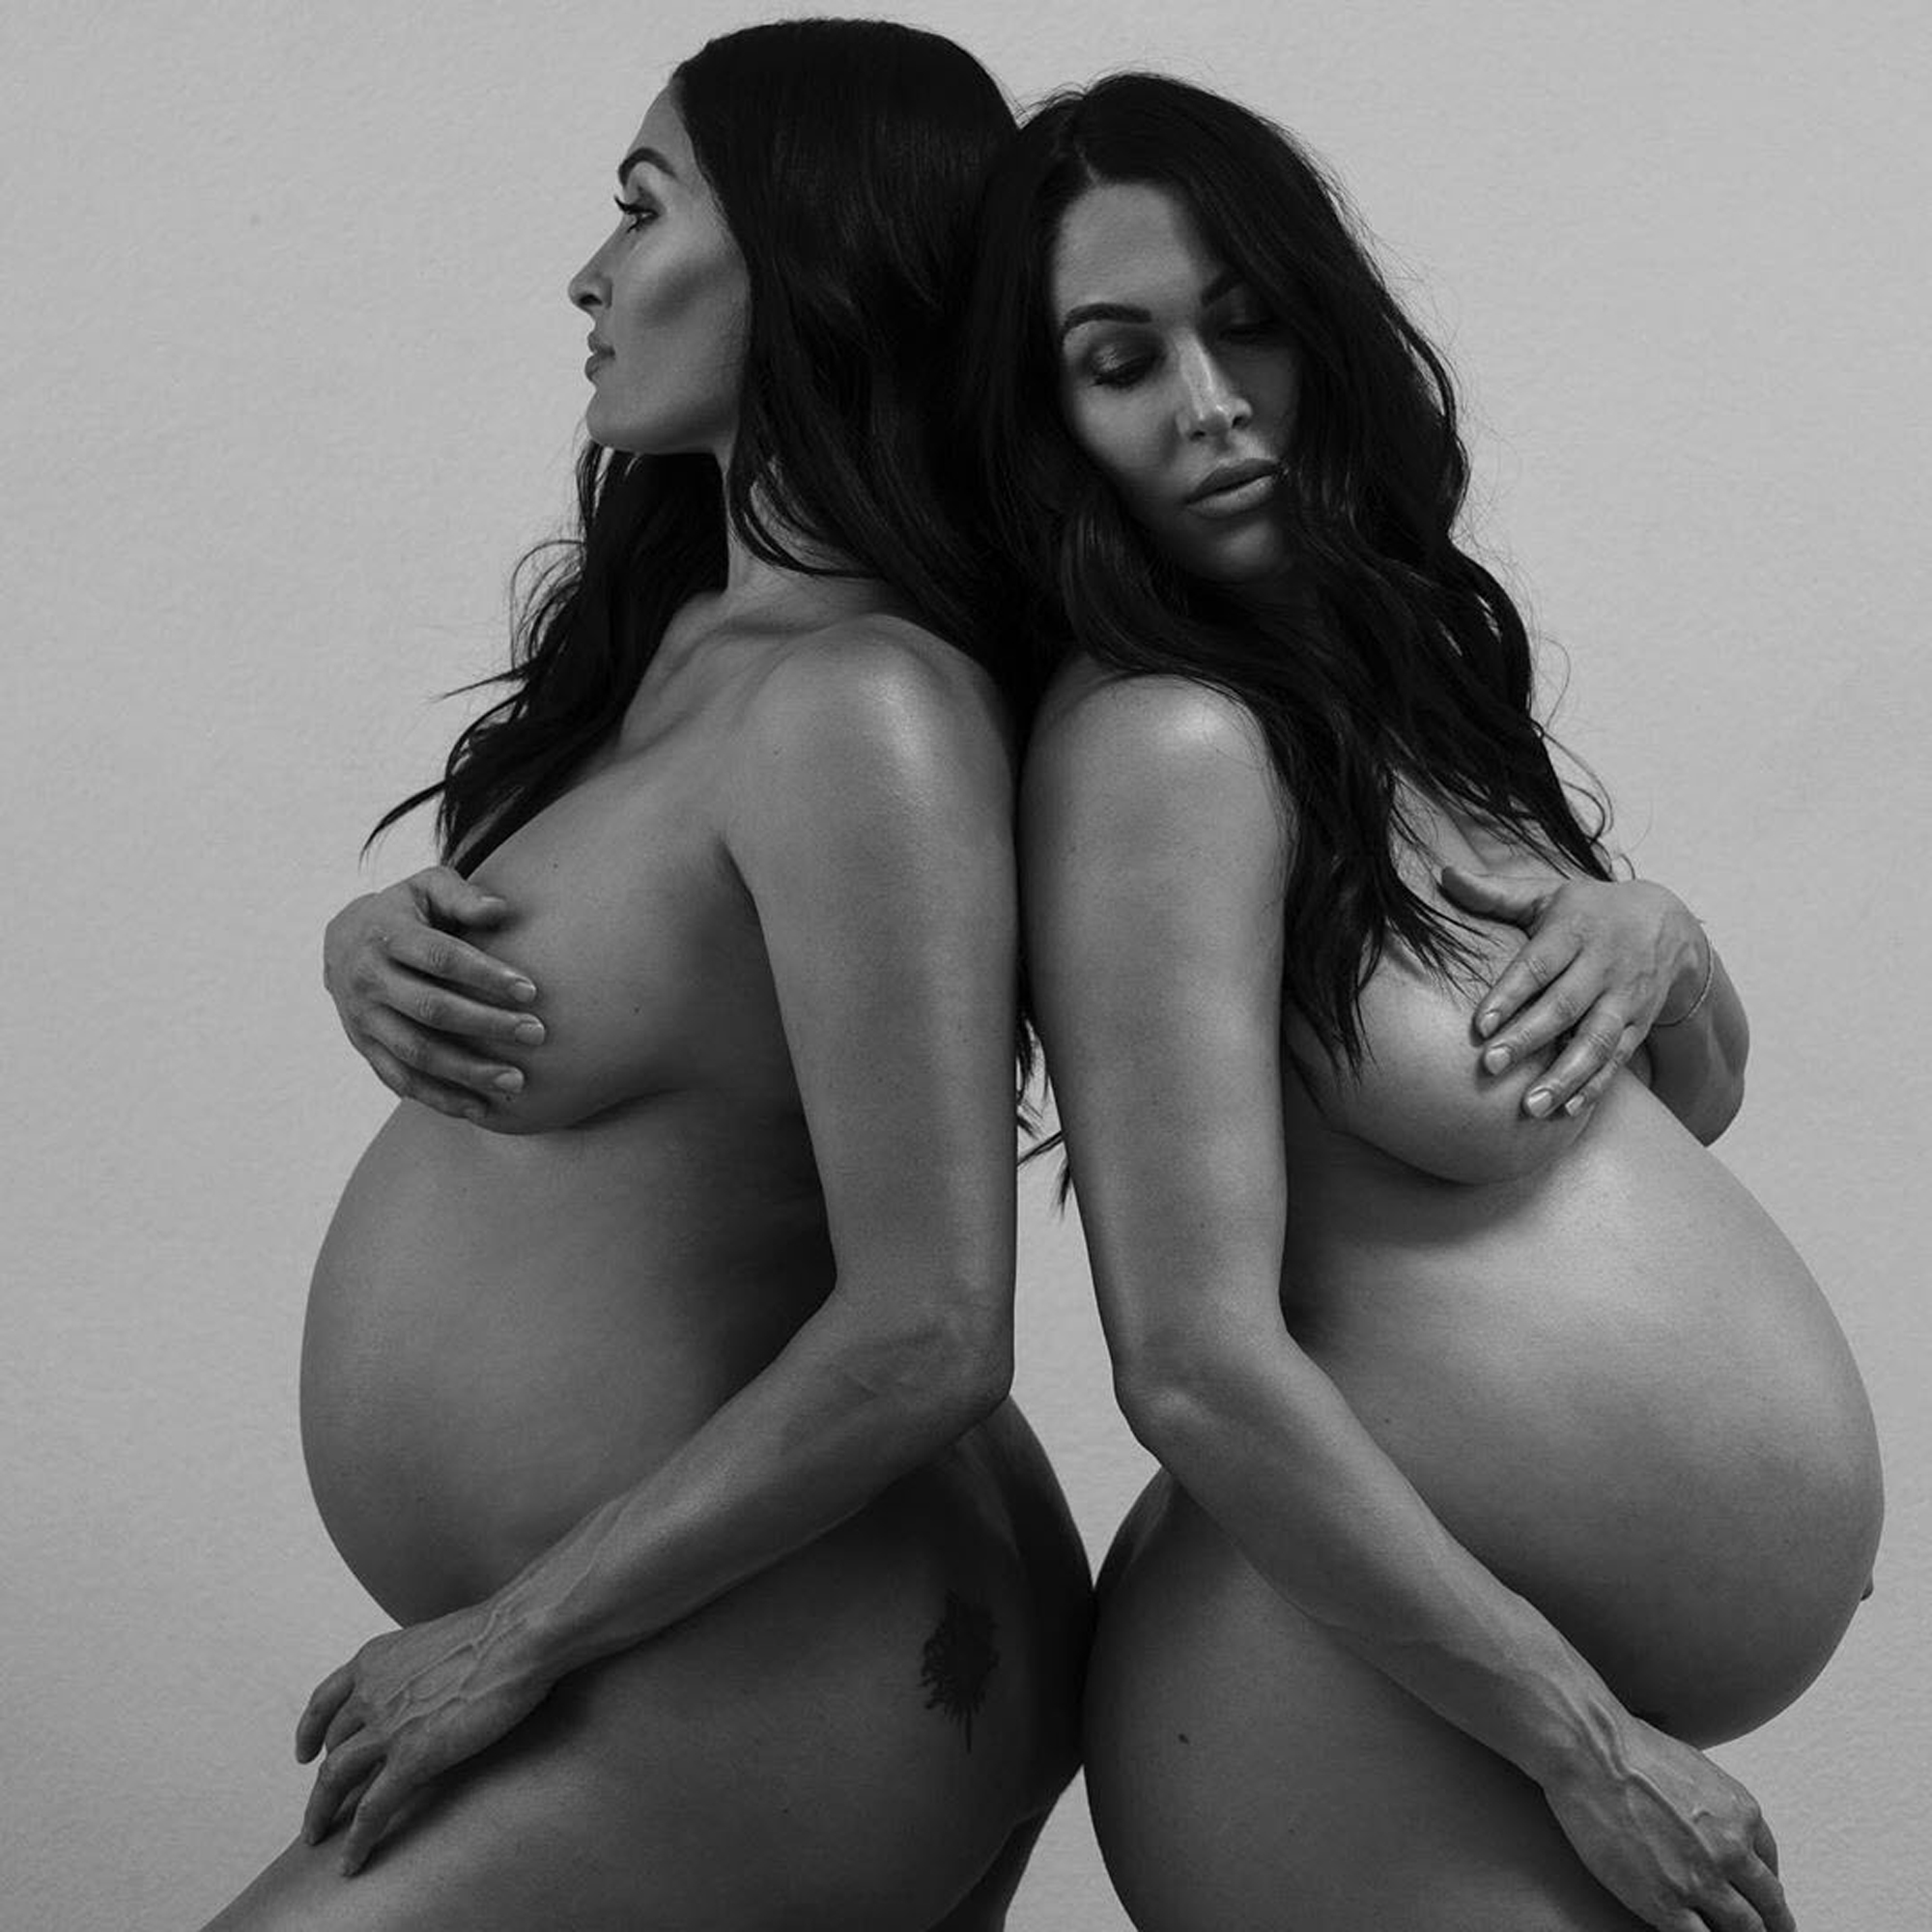 Sexy Naked Black Womwn With Out Making Each Other - Pregnant Nikki, Brie Bella Pose Nude Ahead of Birth: Baby Bump Pics